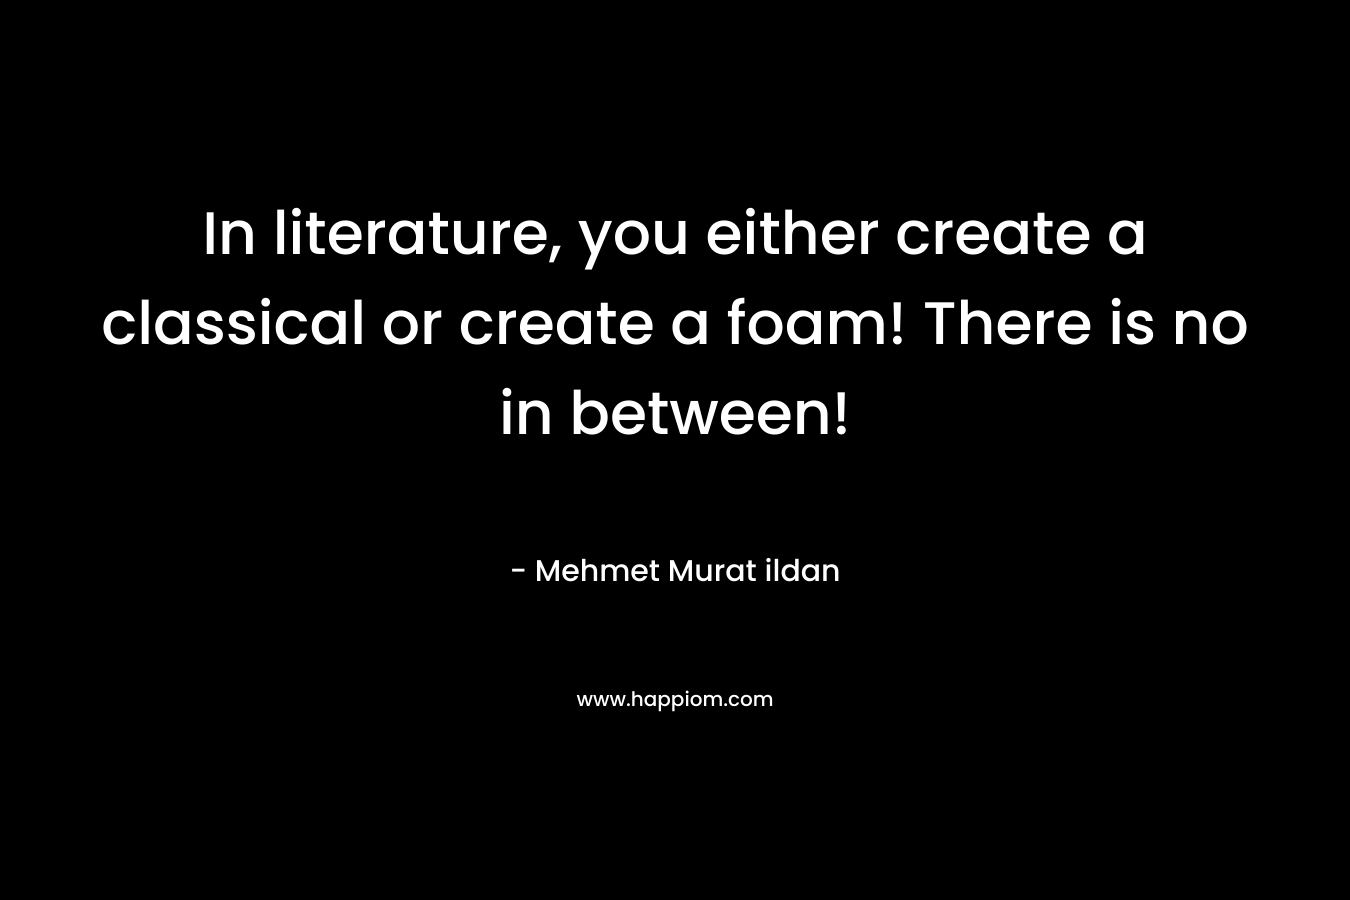 In literature, you either create a classical or create a foam! There is no in between! – Mehmet Murat ildan